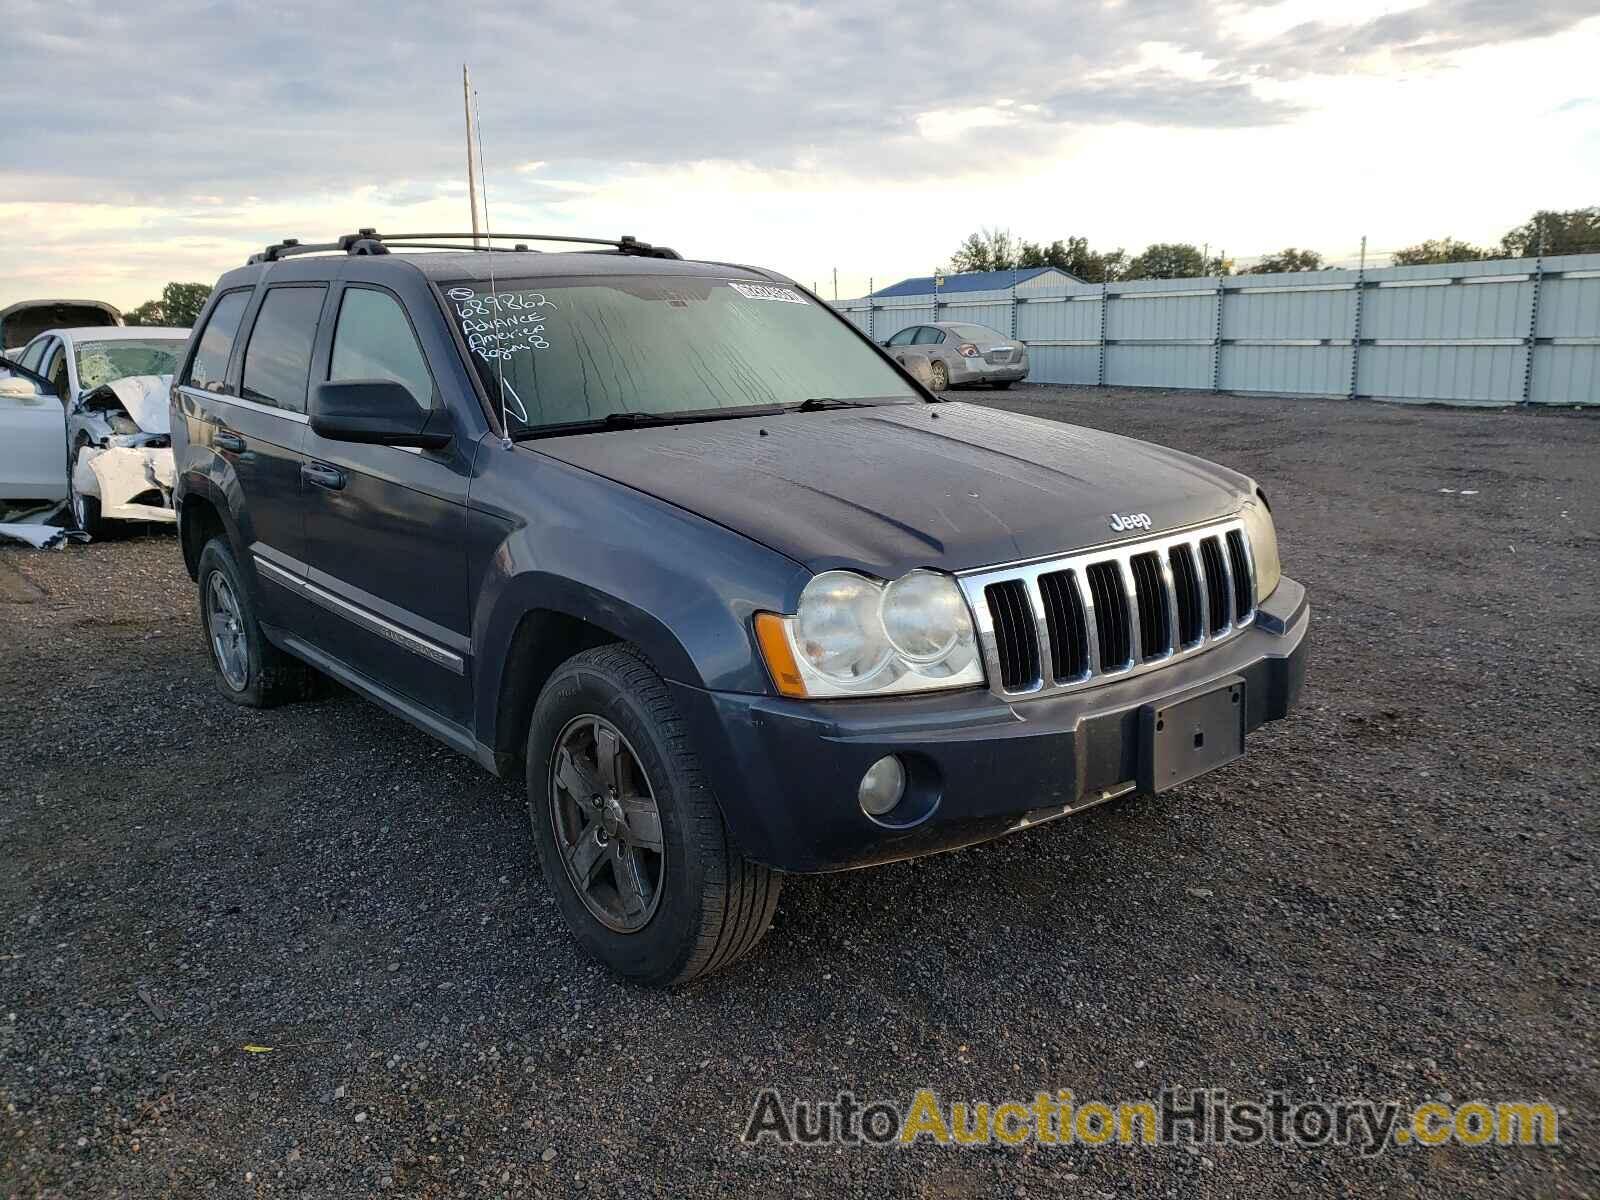 2007 JEEP CHEROKEE LIMITED, 1J8HS58297C689862